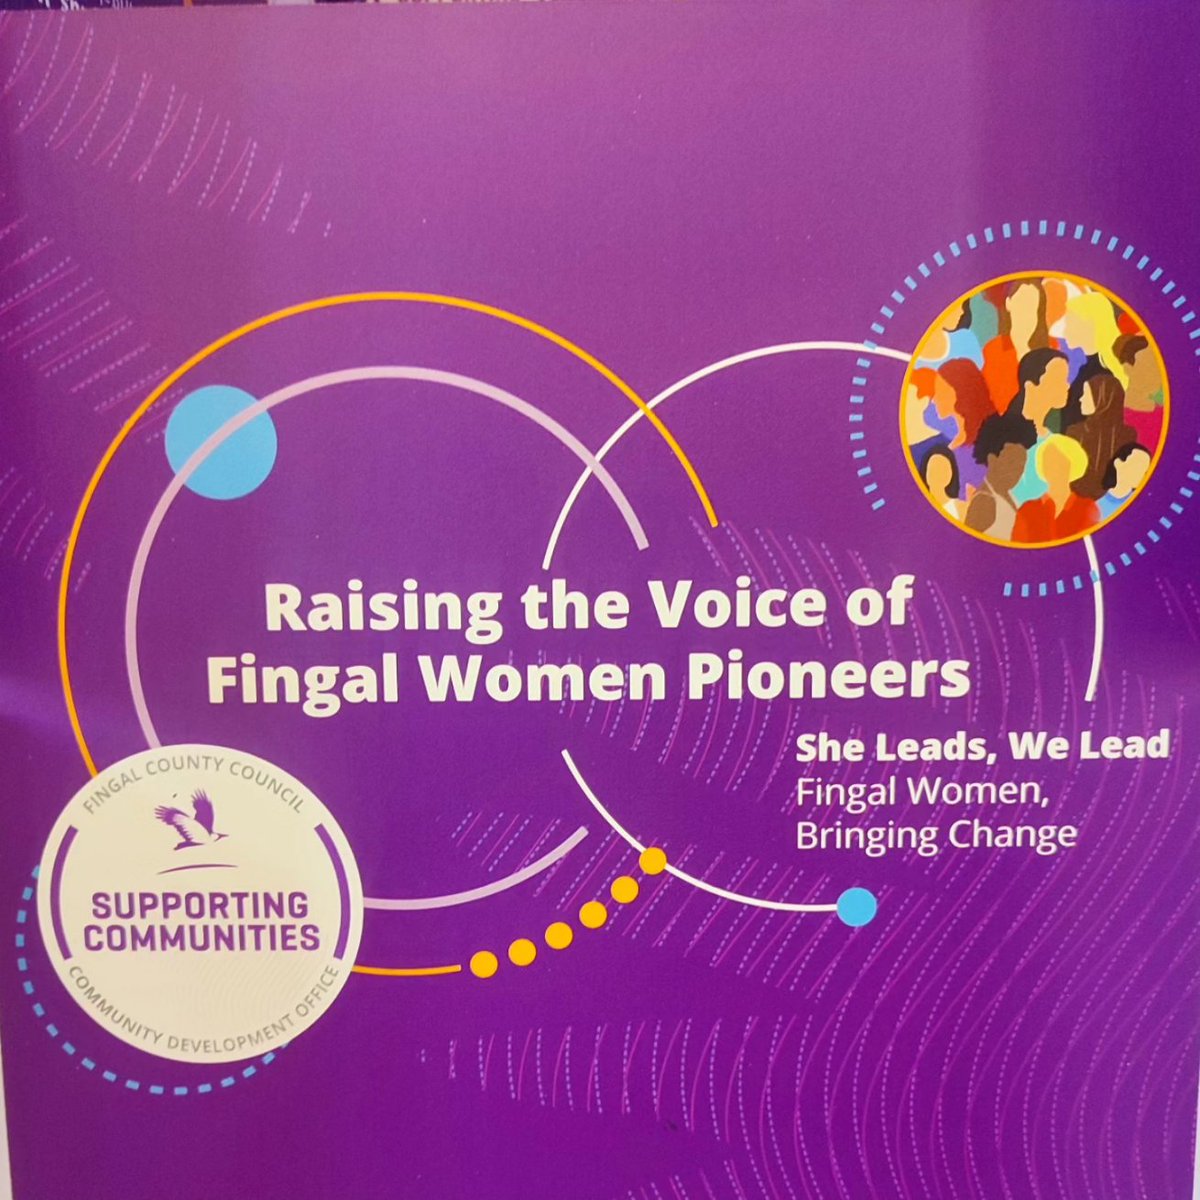 Our chairperson Samantha is taking part in the She Leads project with @Fingalcoco - raising the voice of women in Fingal. She'll be looking to chat to women in our community about issues important to them so keep an eye on our socials. #FingalWomenBringingChange